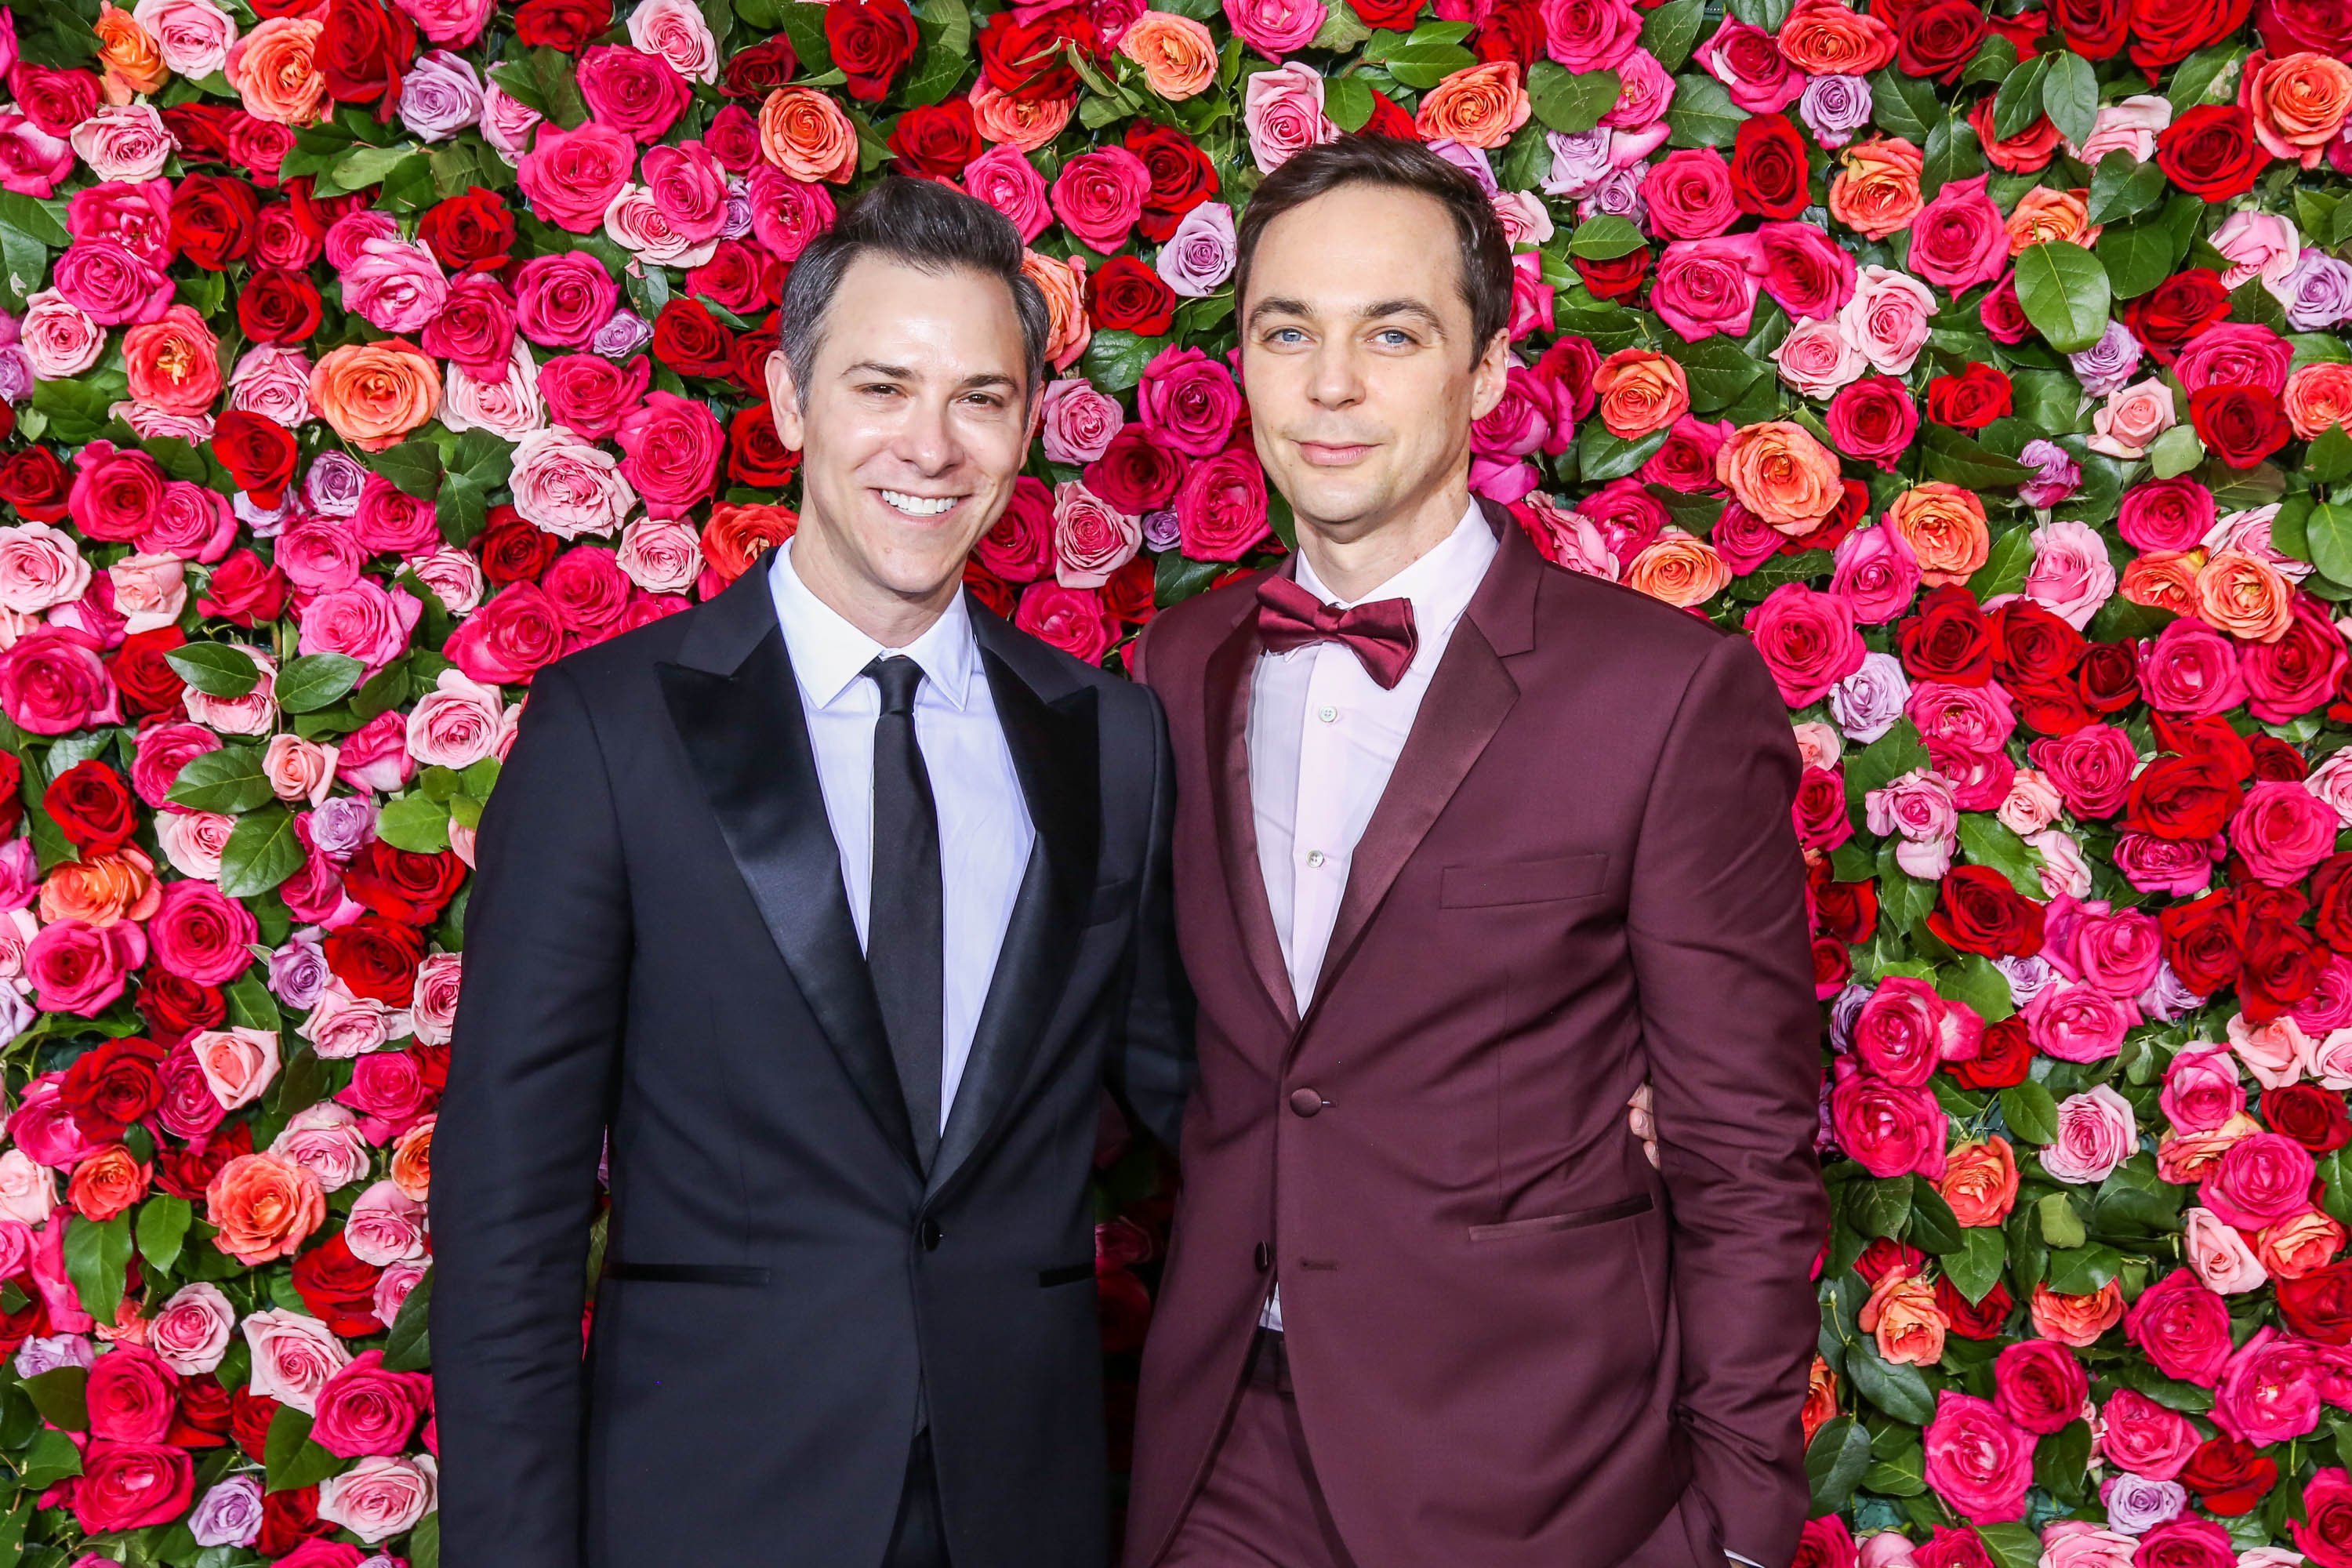 Todd Spiewak and Jim Parsons at the 72nd Annual Tony Awards on June 10, 2018 | Source: Getty Images